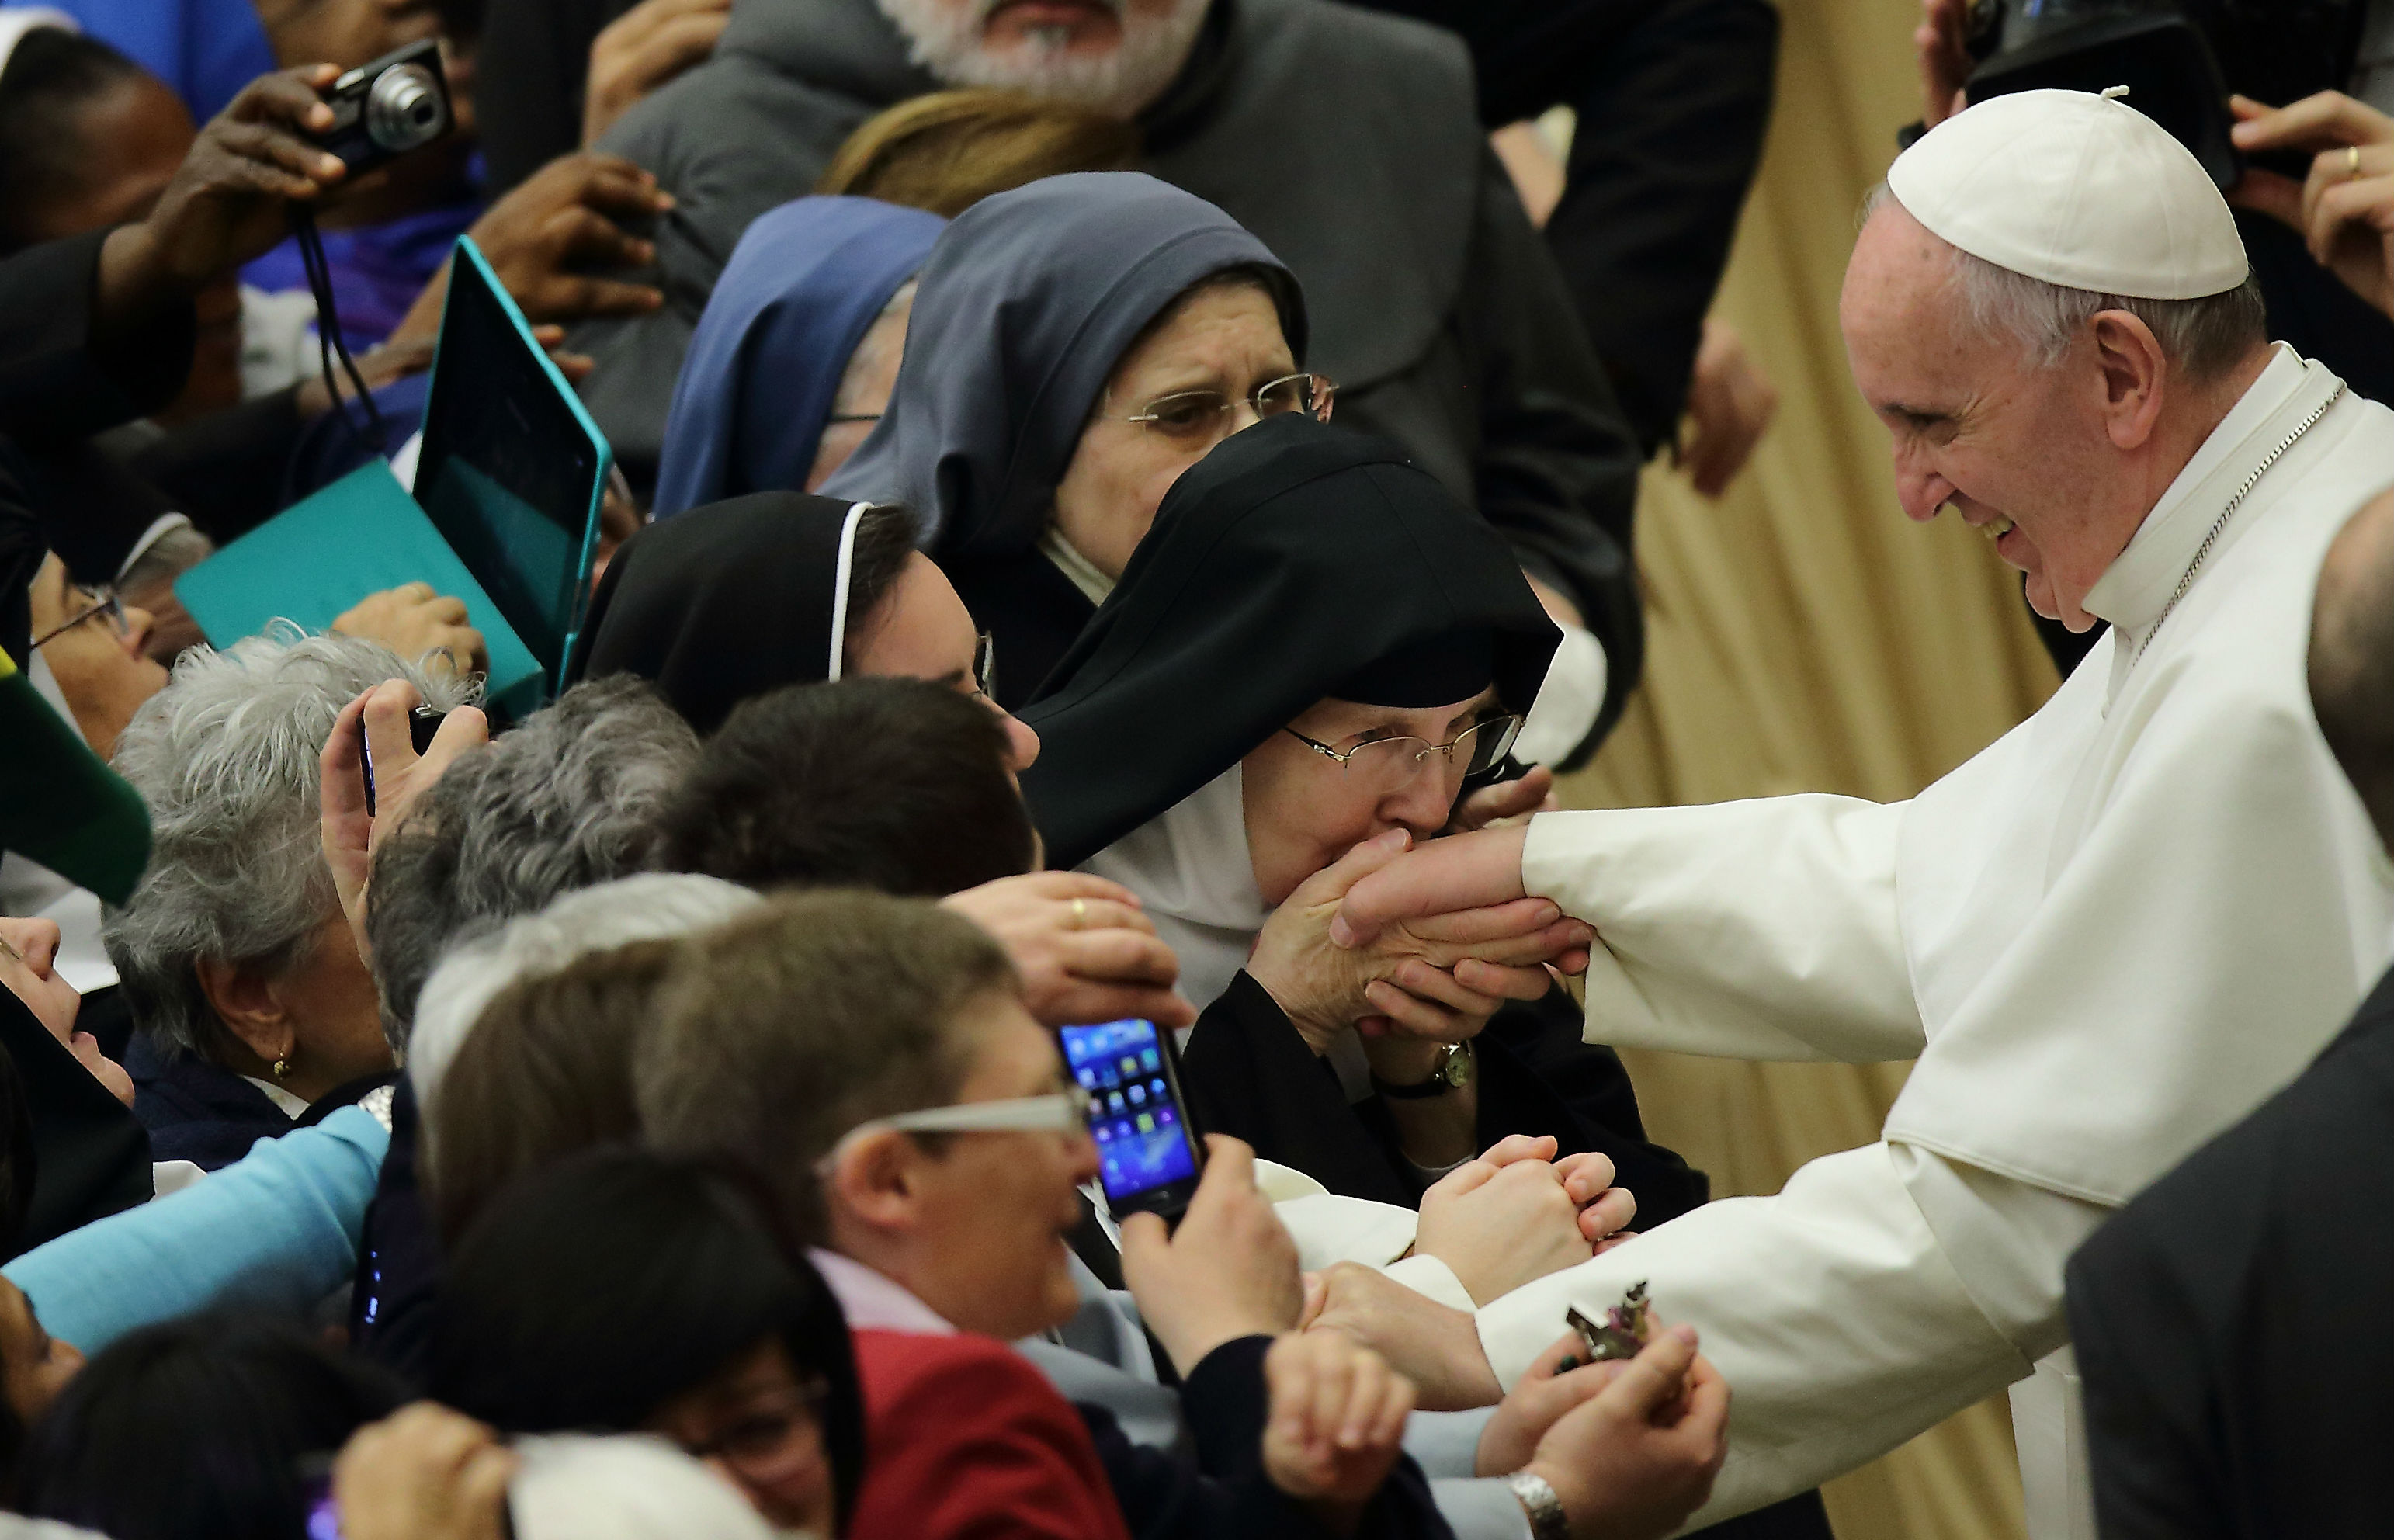 Pope Francis: Never underestimate the courage and wisdom of women